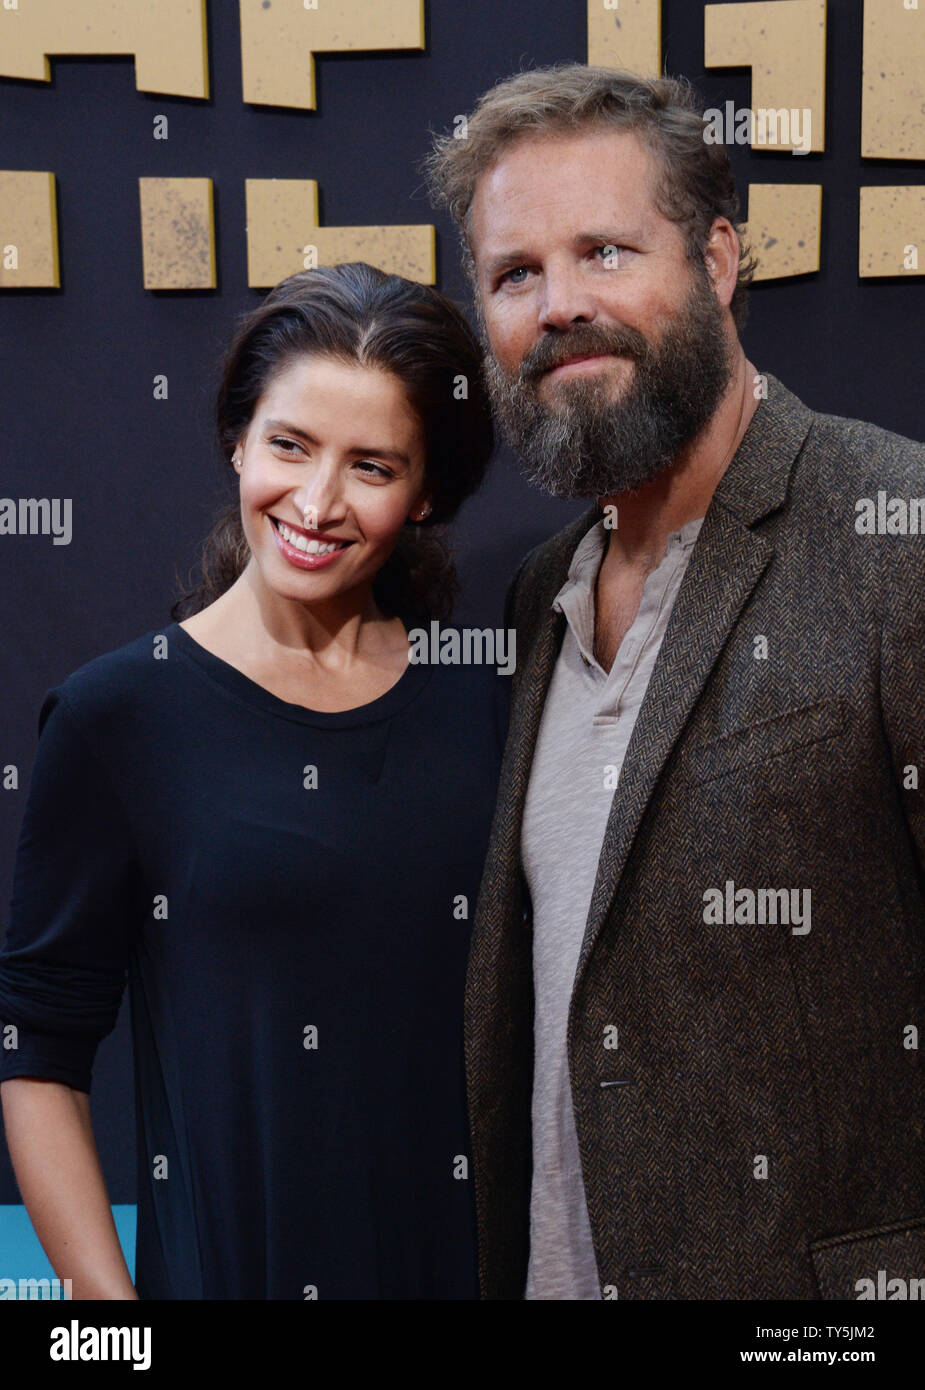 Cast member David Denman and his wife, actress Mercedes Masohn attend the premiere of the motion picture thriller 'The Gift' at Regal Cinemas L.A. Live in Los Angeles on July 30, 2015. Storyline: A young married couple's lives are thrown into a harrowing tailspin when an acquaintance from the husband's past brings mysterious gifts and a horrifying secret to light after more than 20 years. Photo by Jim Ruymen/UPI Stock Photo